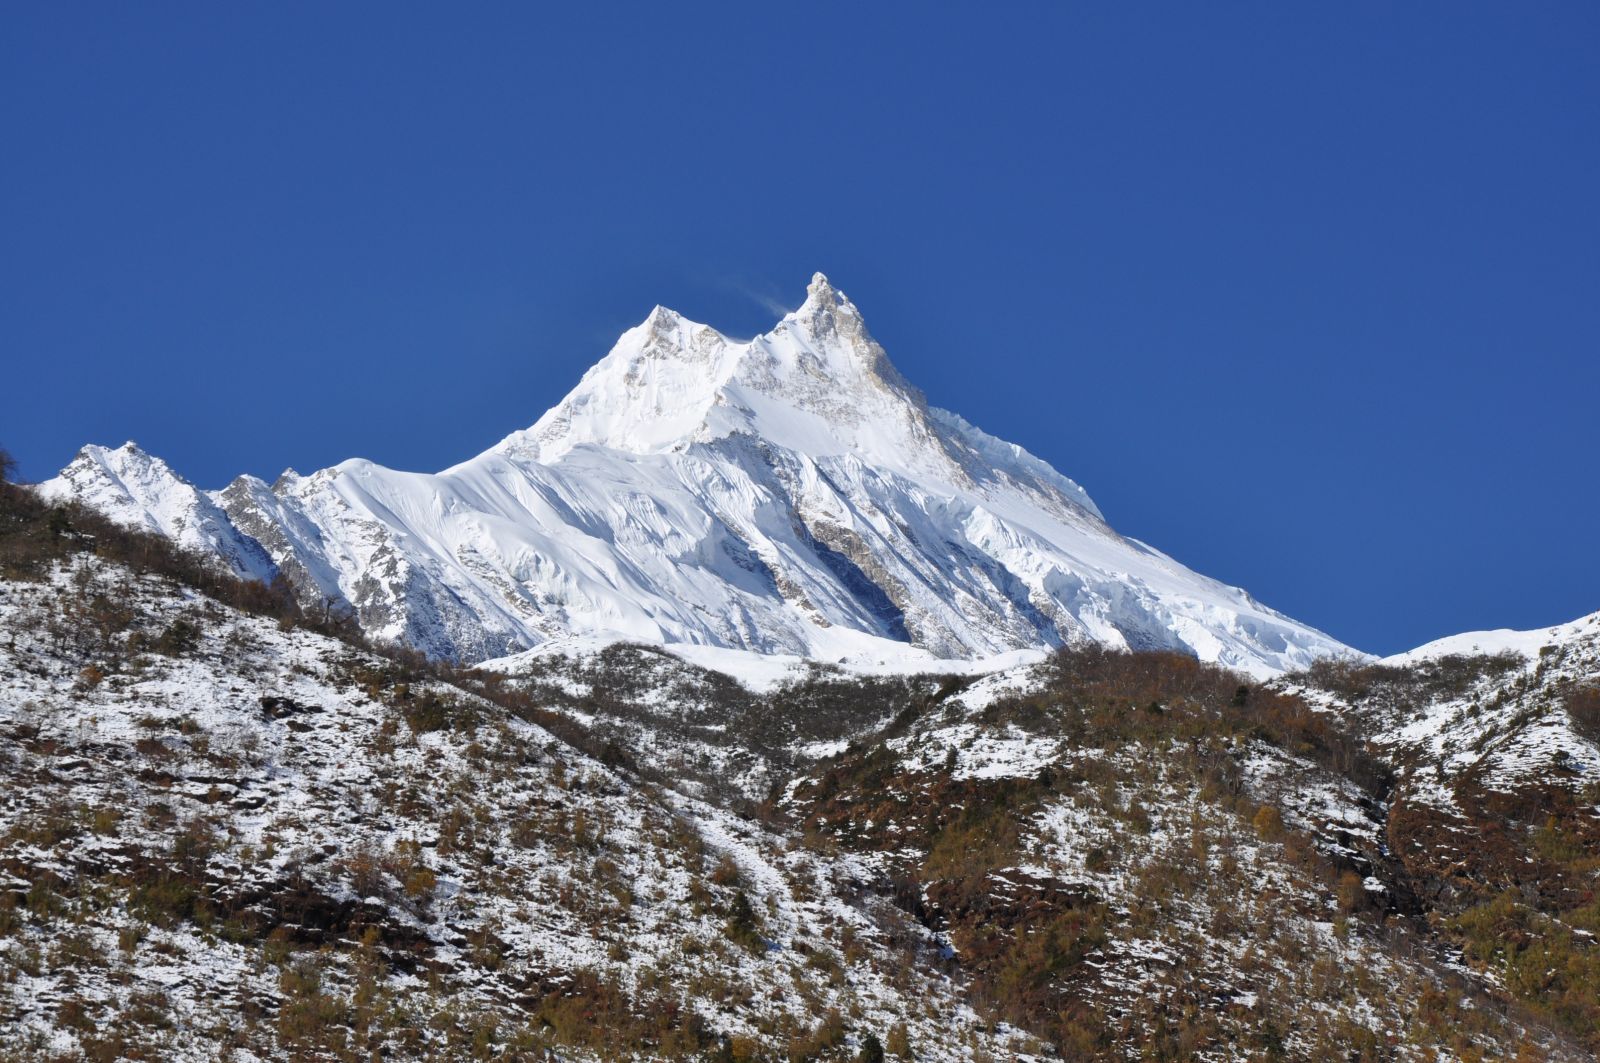 View of amazing mountains is one of the reasons why people love trekking in Manaslu